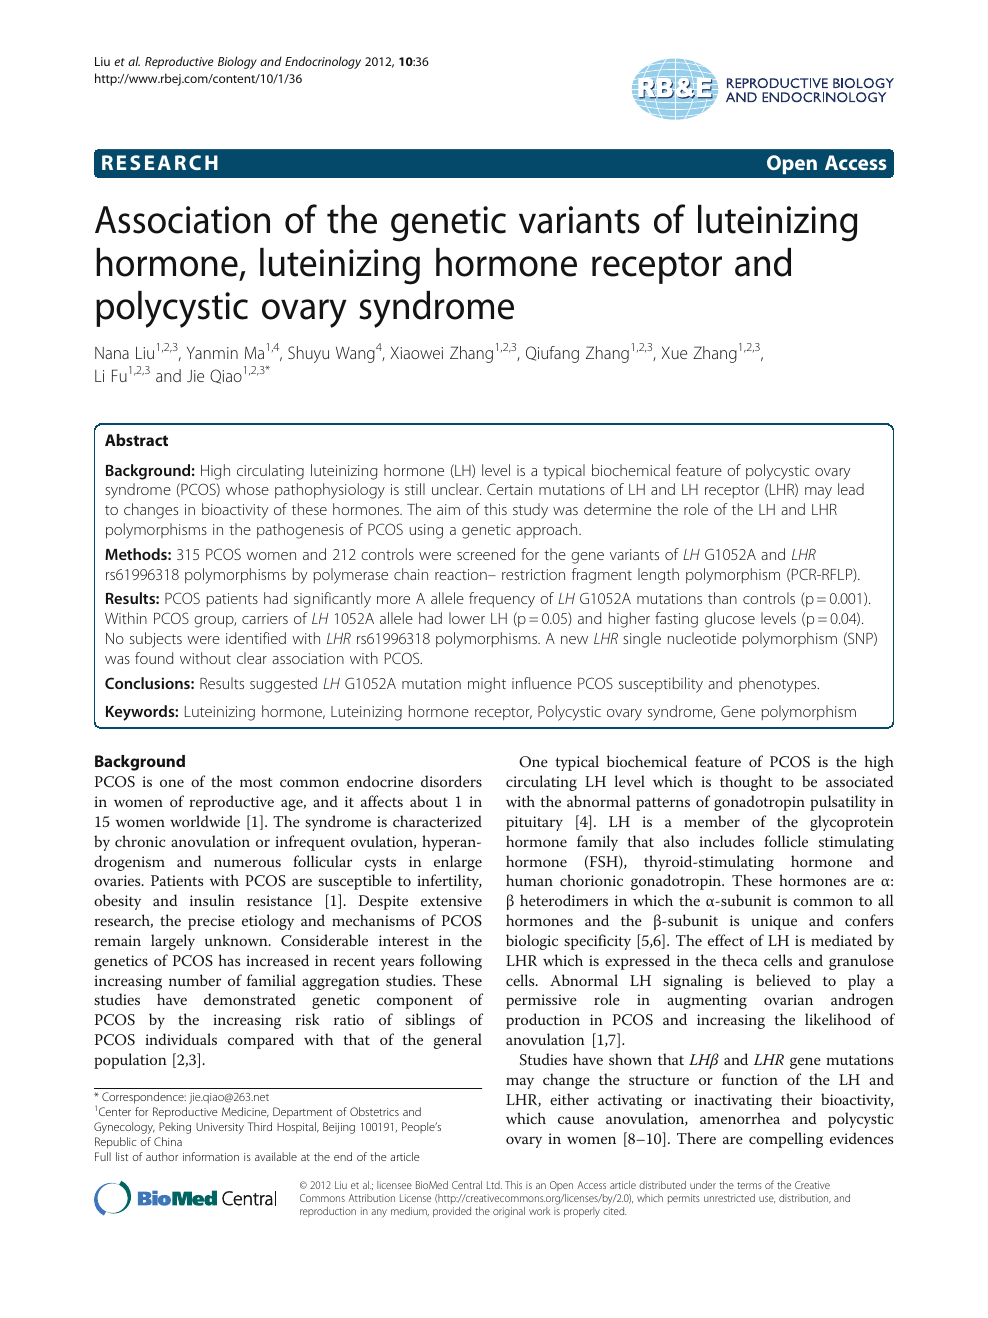 Association Of The Genetic Variants Of Luteinizing Hormone